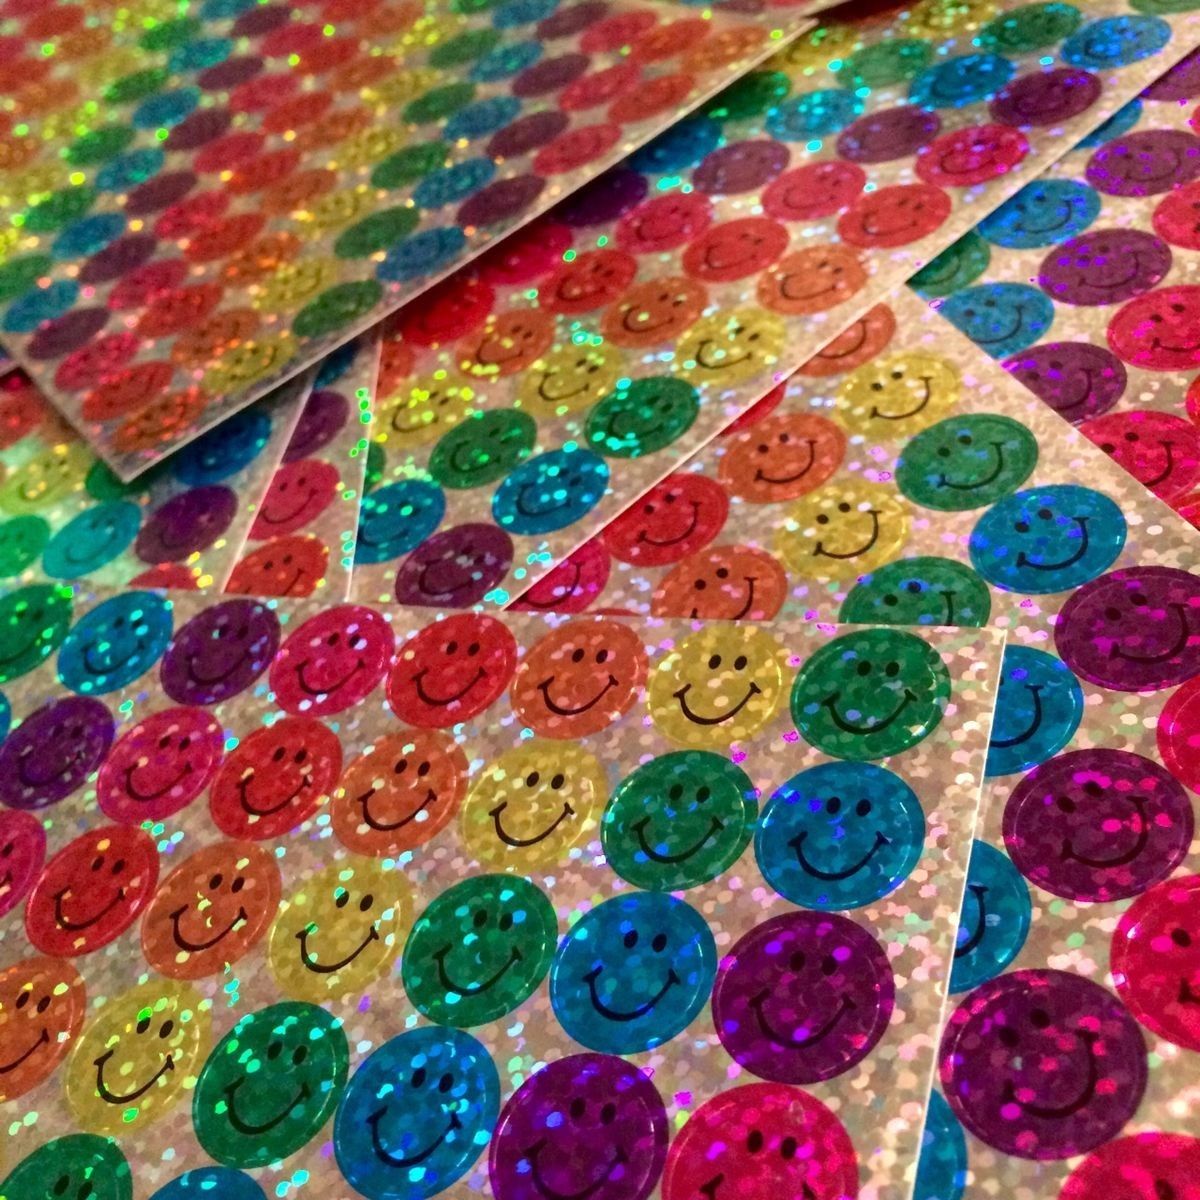 Pages of the glittery smiley face stickers they gave you in elementary school for good behavior